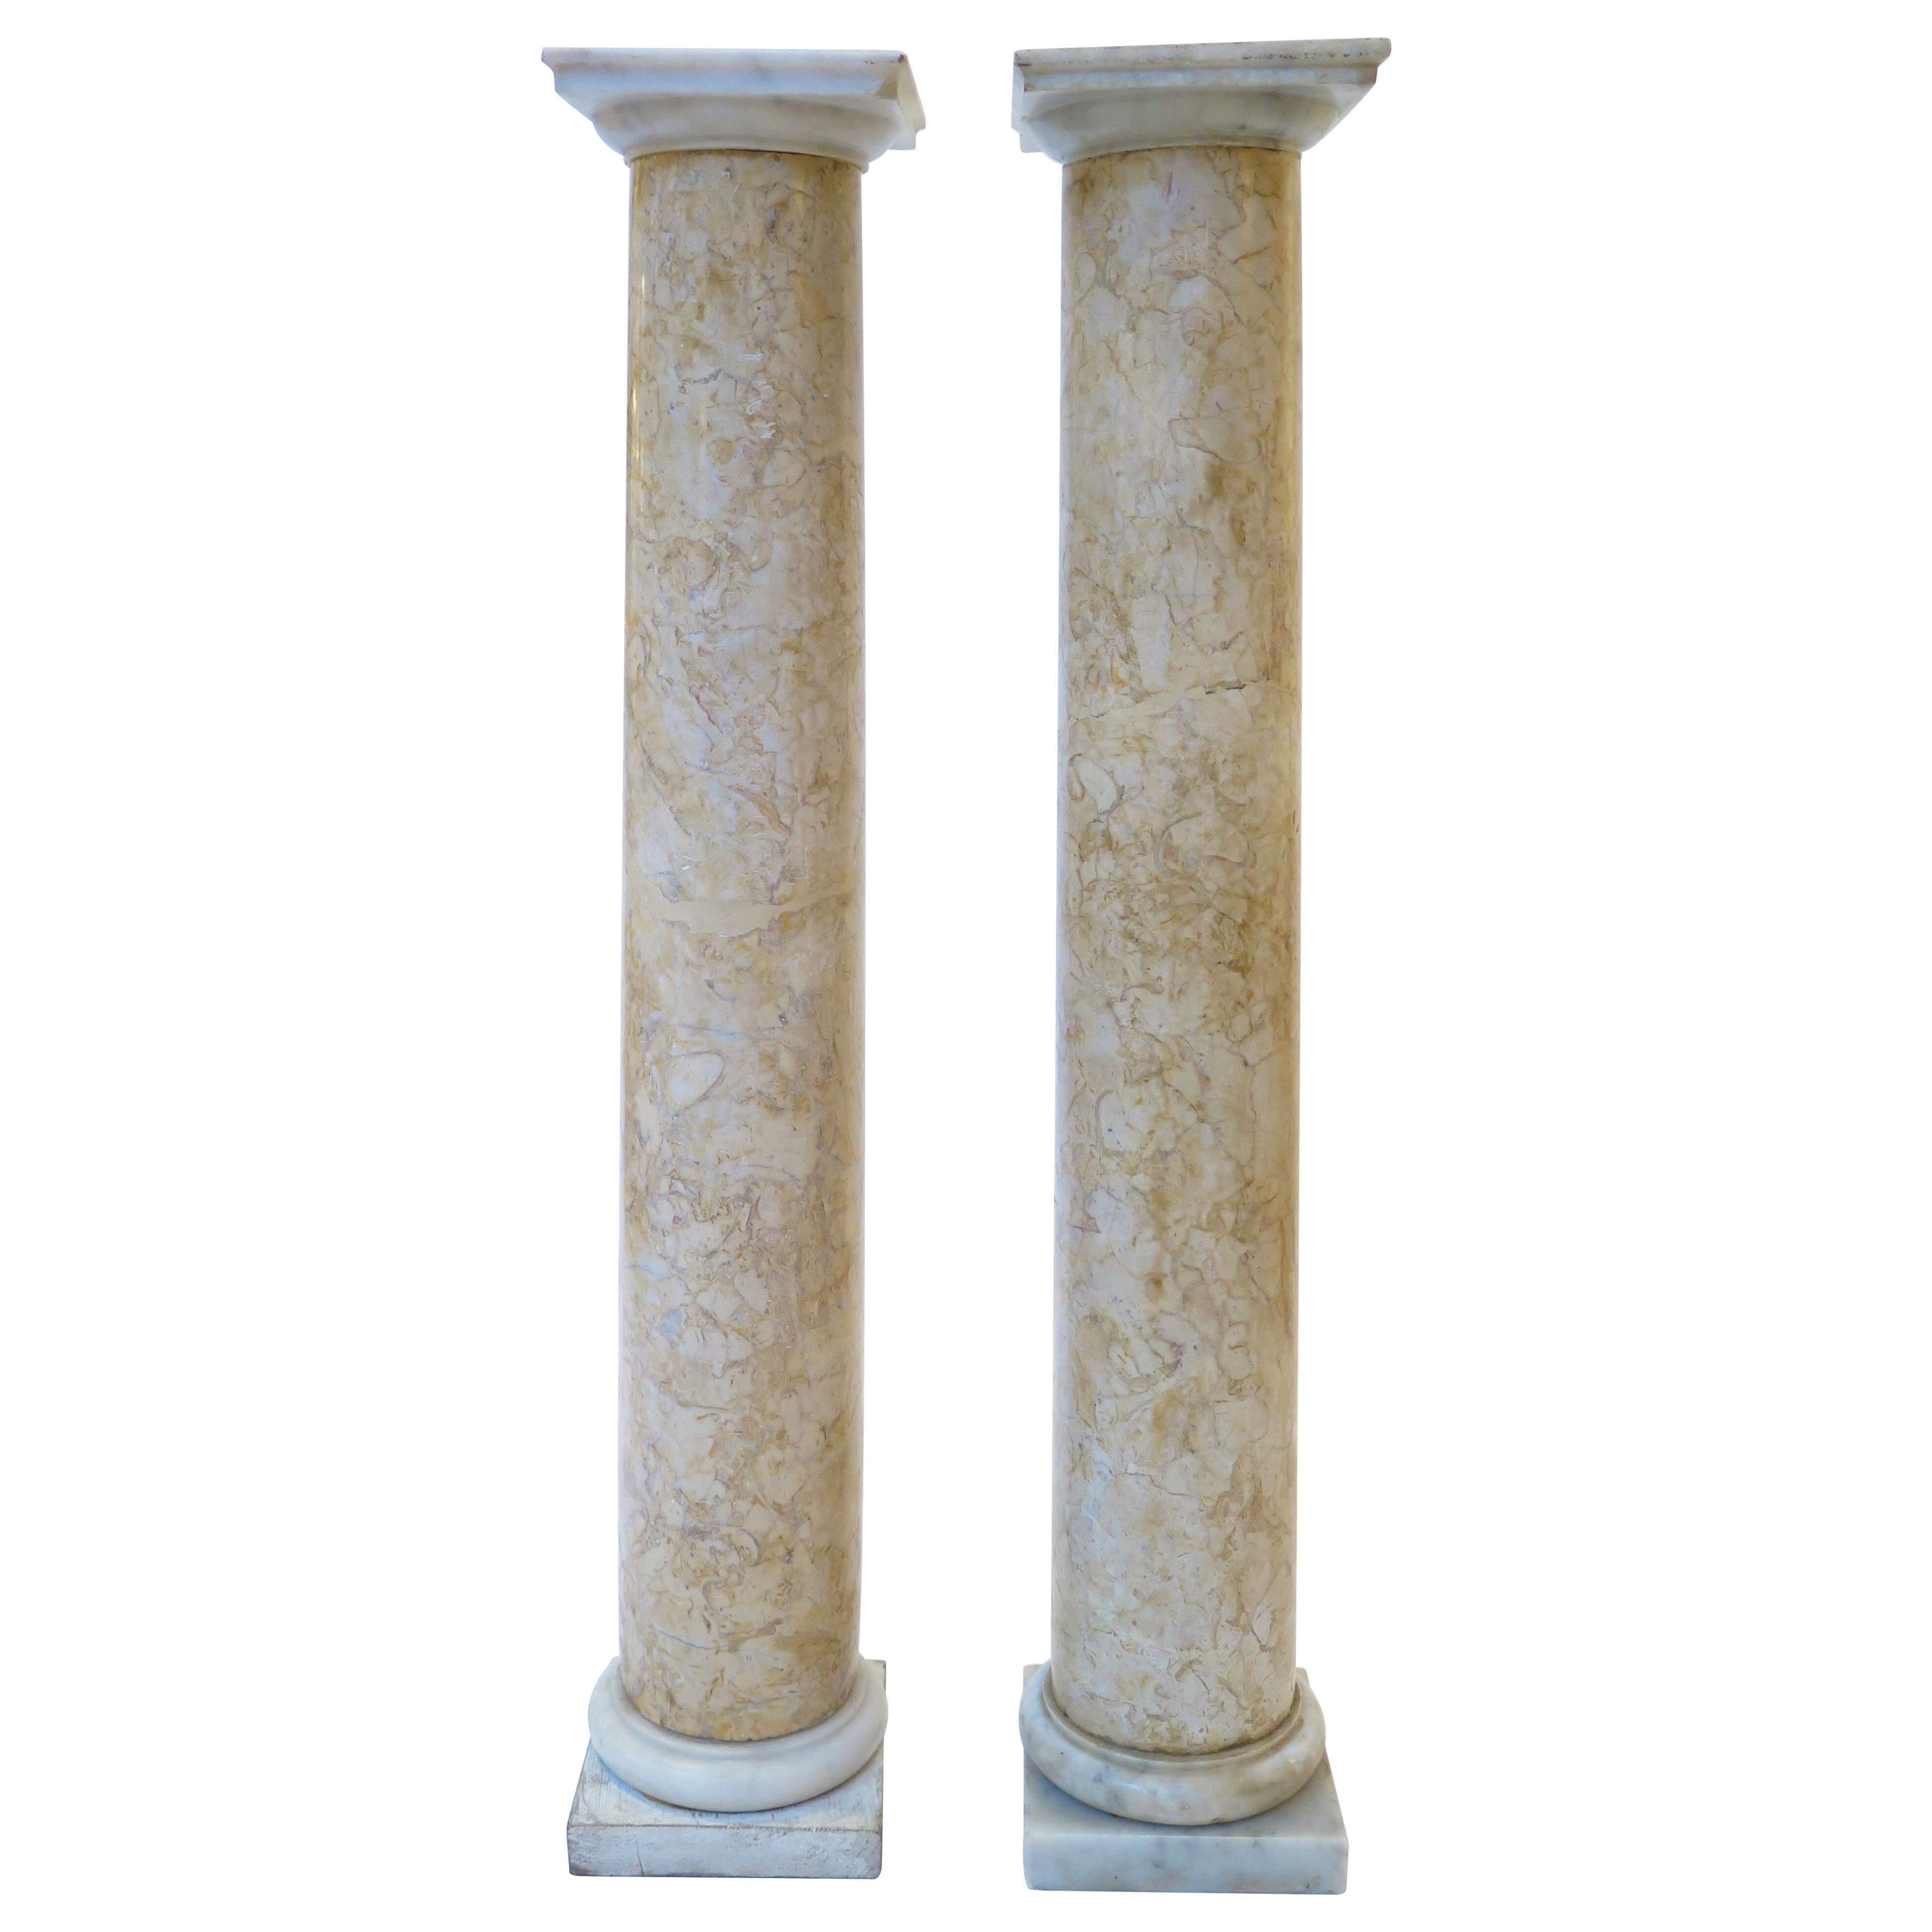 A Pair of Grand Tour Italian Carved Marble Columns